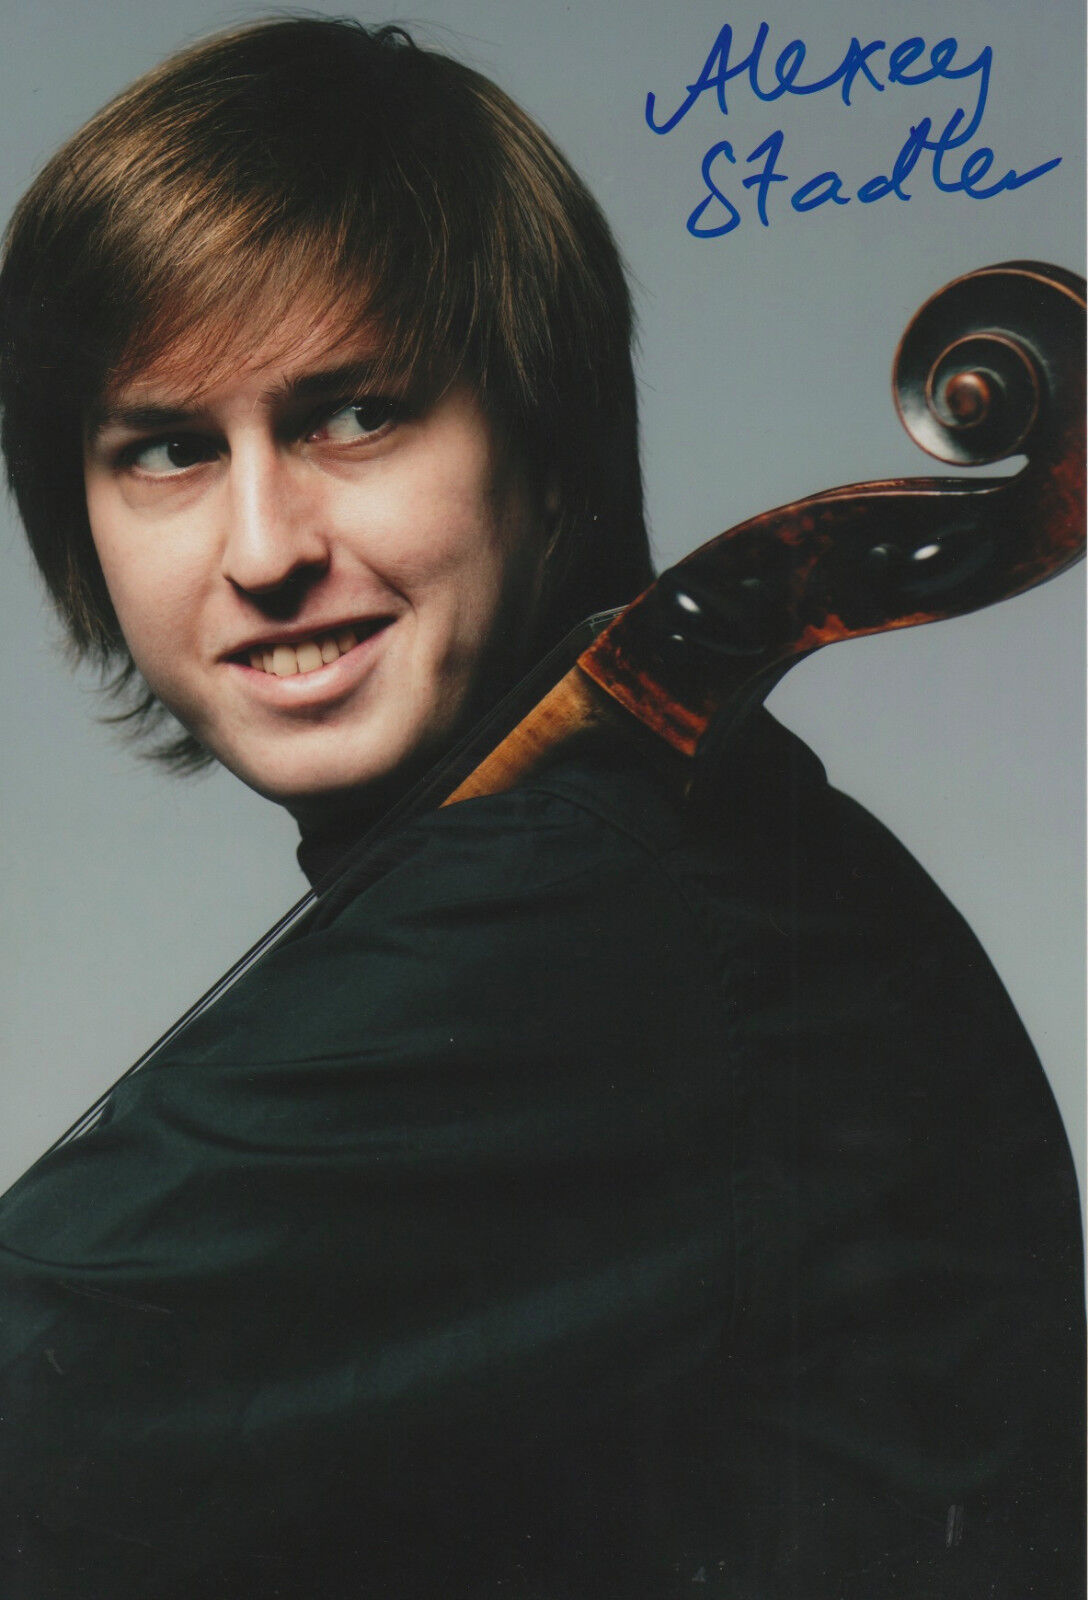 Alexey Stadler Cellist signed 8x12 inch Photo Poster painting autograph